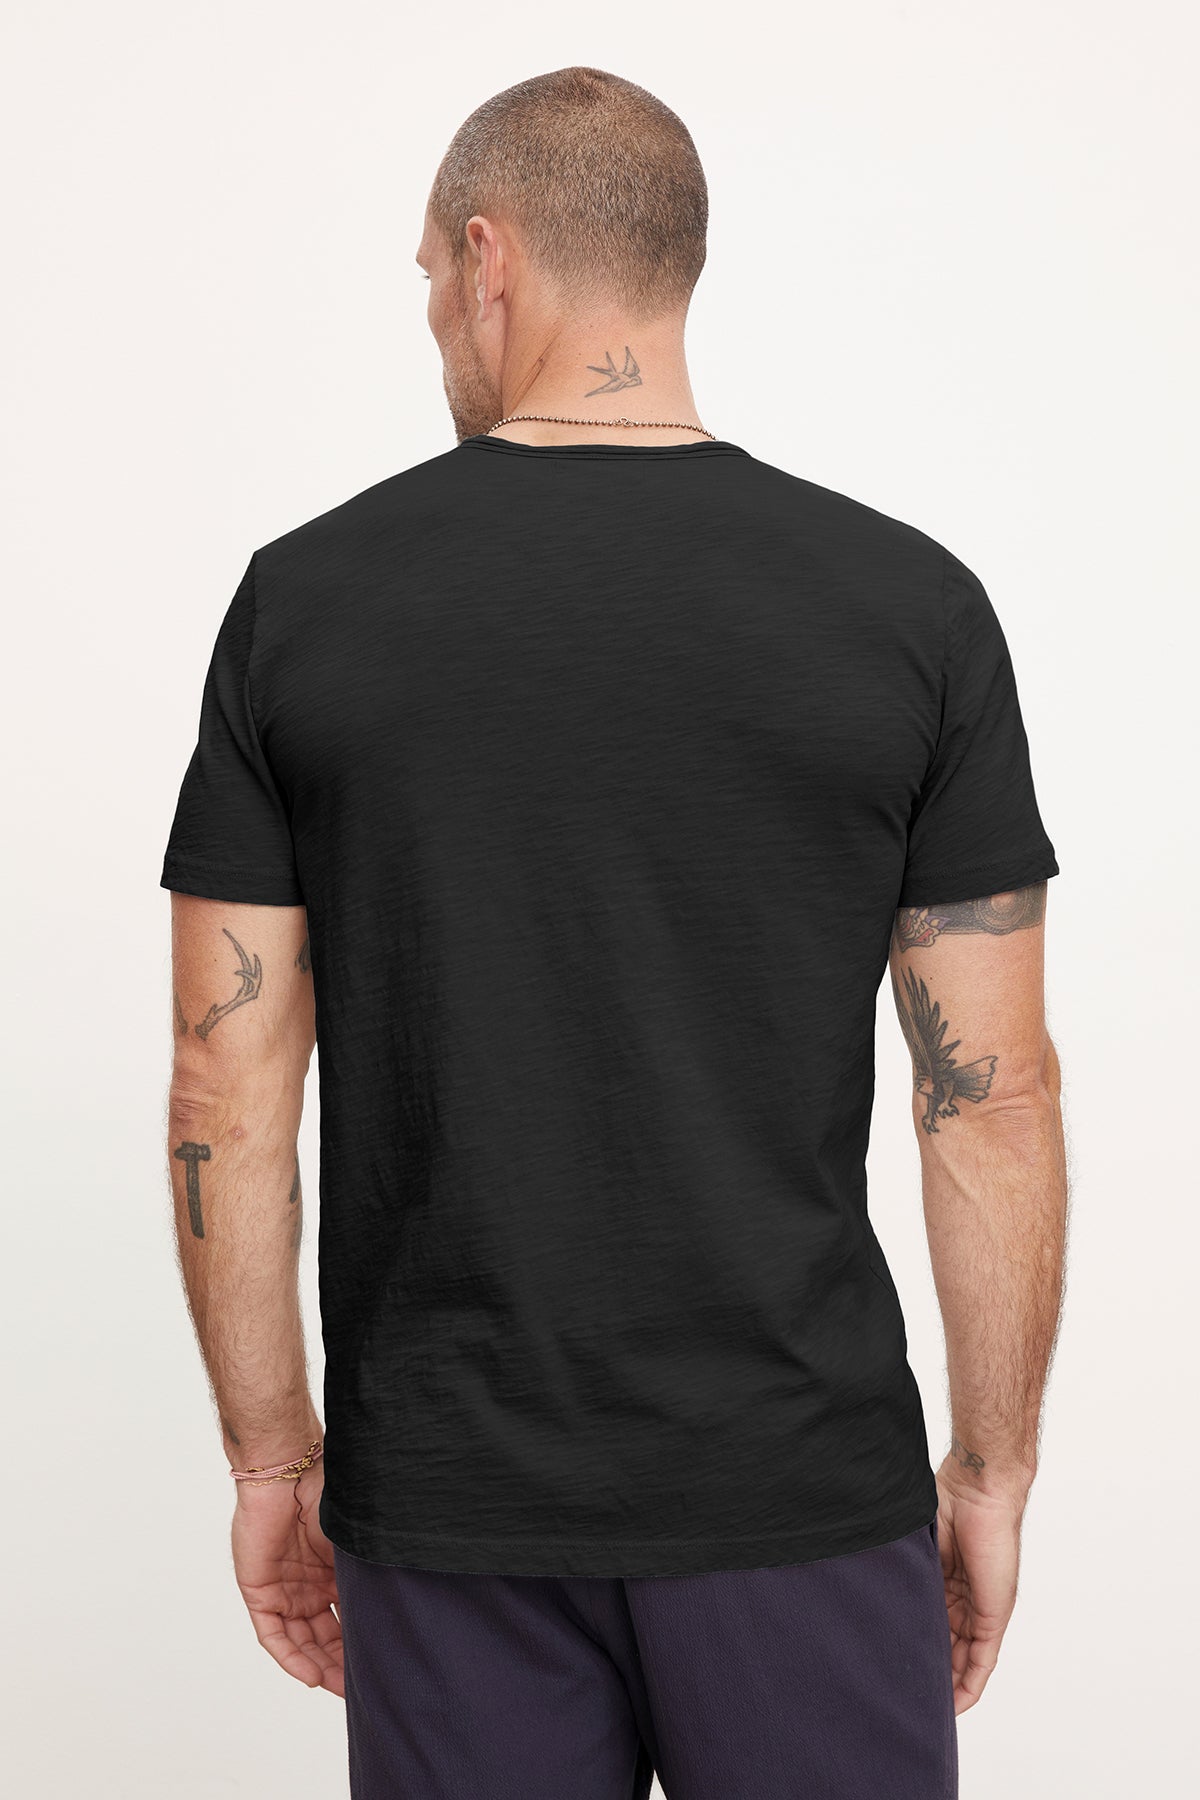 A man seen from the back wearing a Velvet by Graham & Spencer CHAD TEE with raw-edge details and purple pants, displaying various tattoos on his arms and neck.-36909374832833